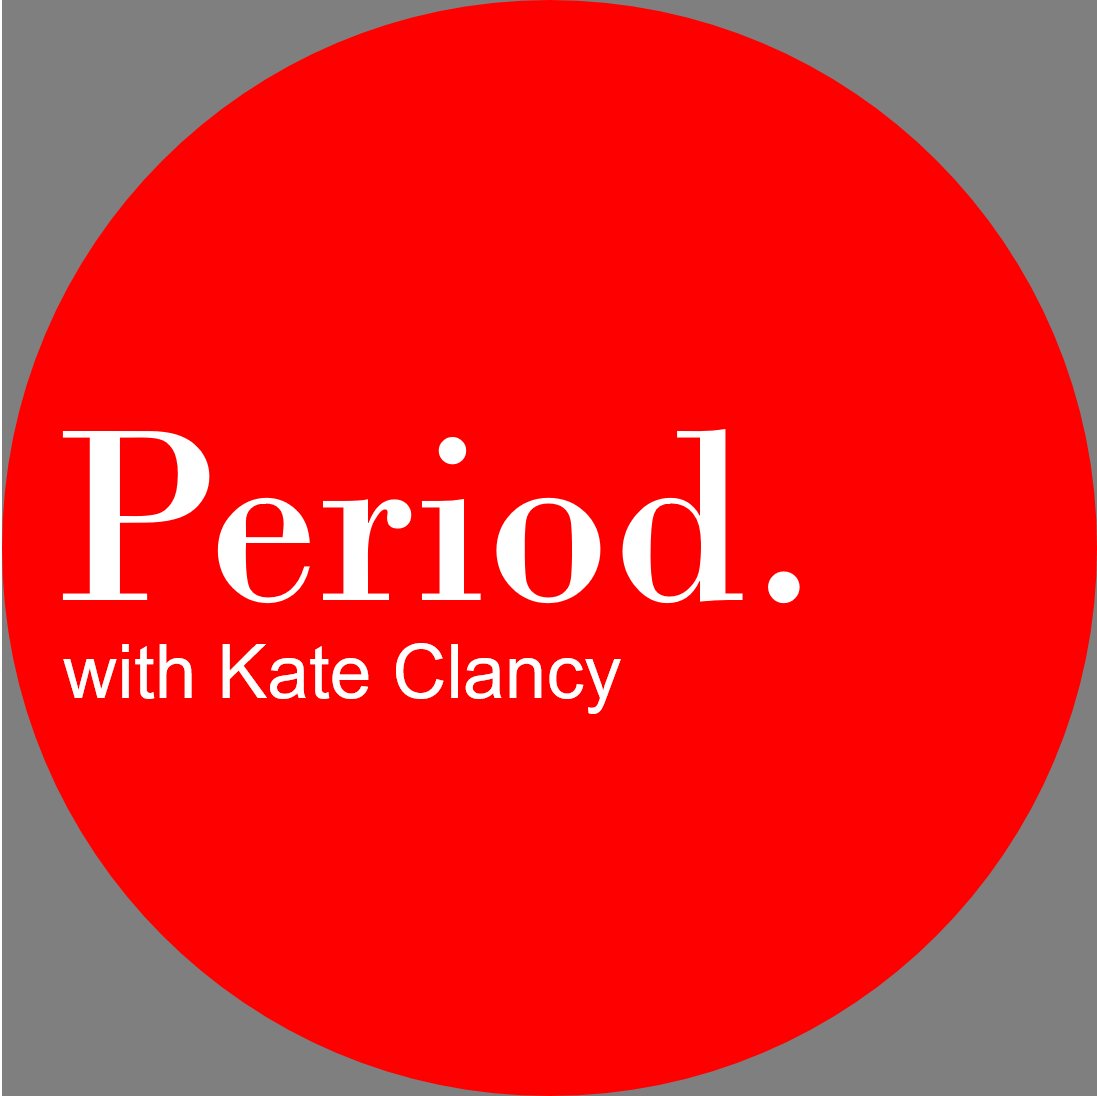 Period Podcast, a podcast about ladypart science by @KateClancy. https://t.co/amMNelbQ10